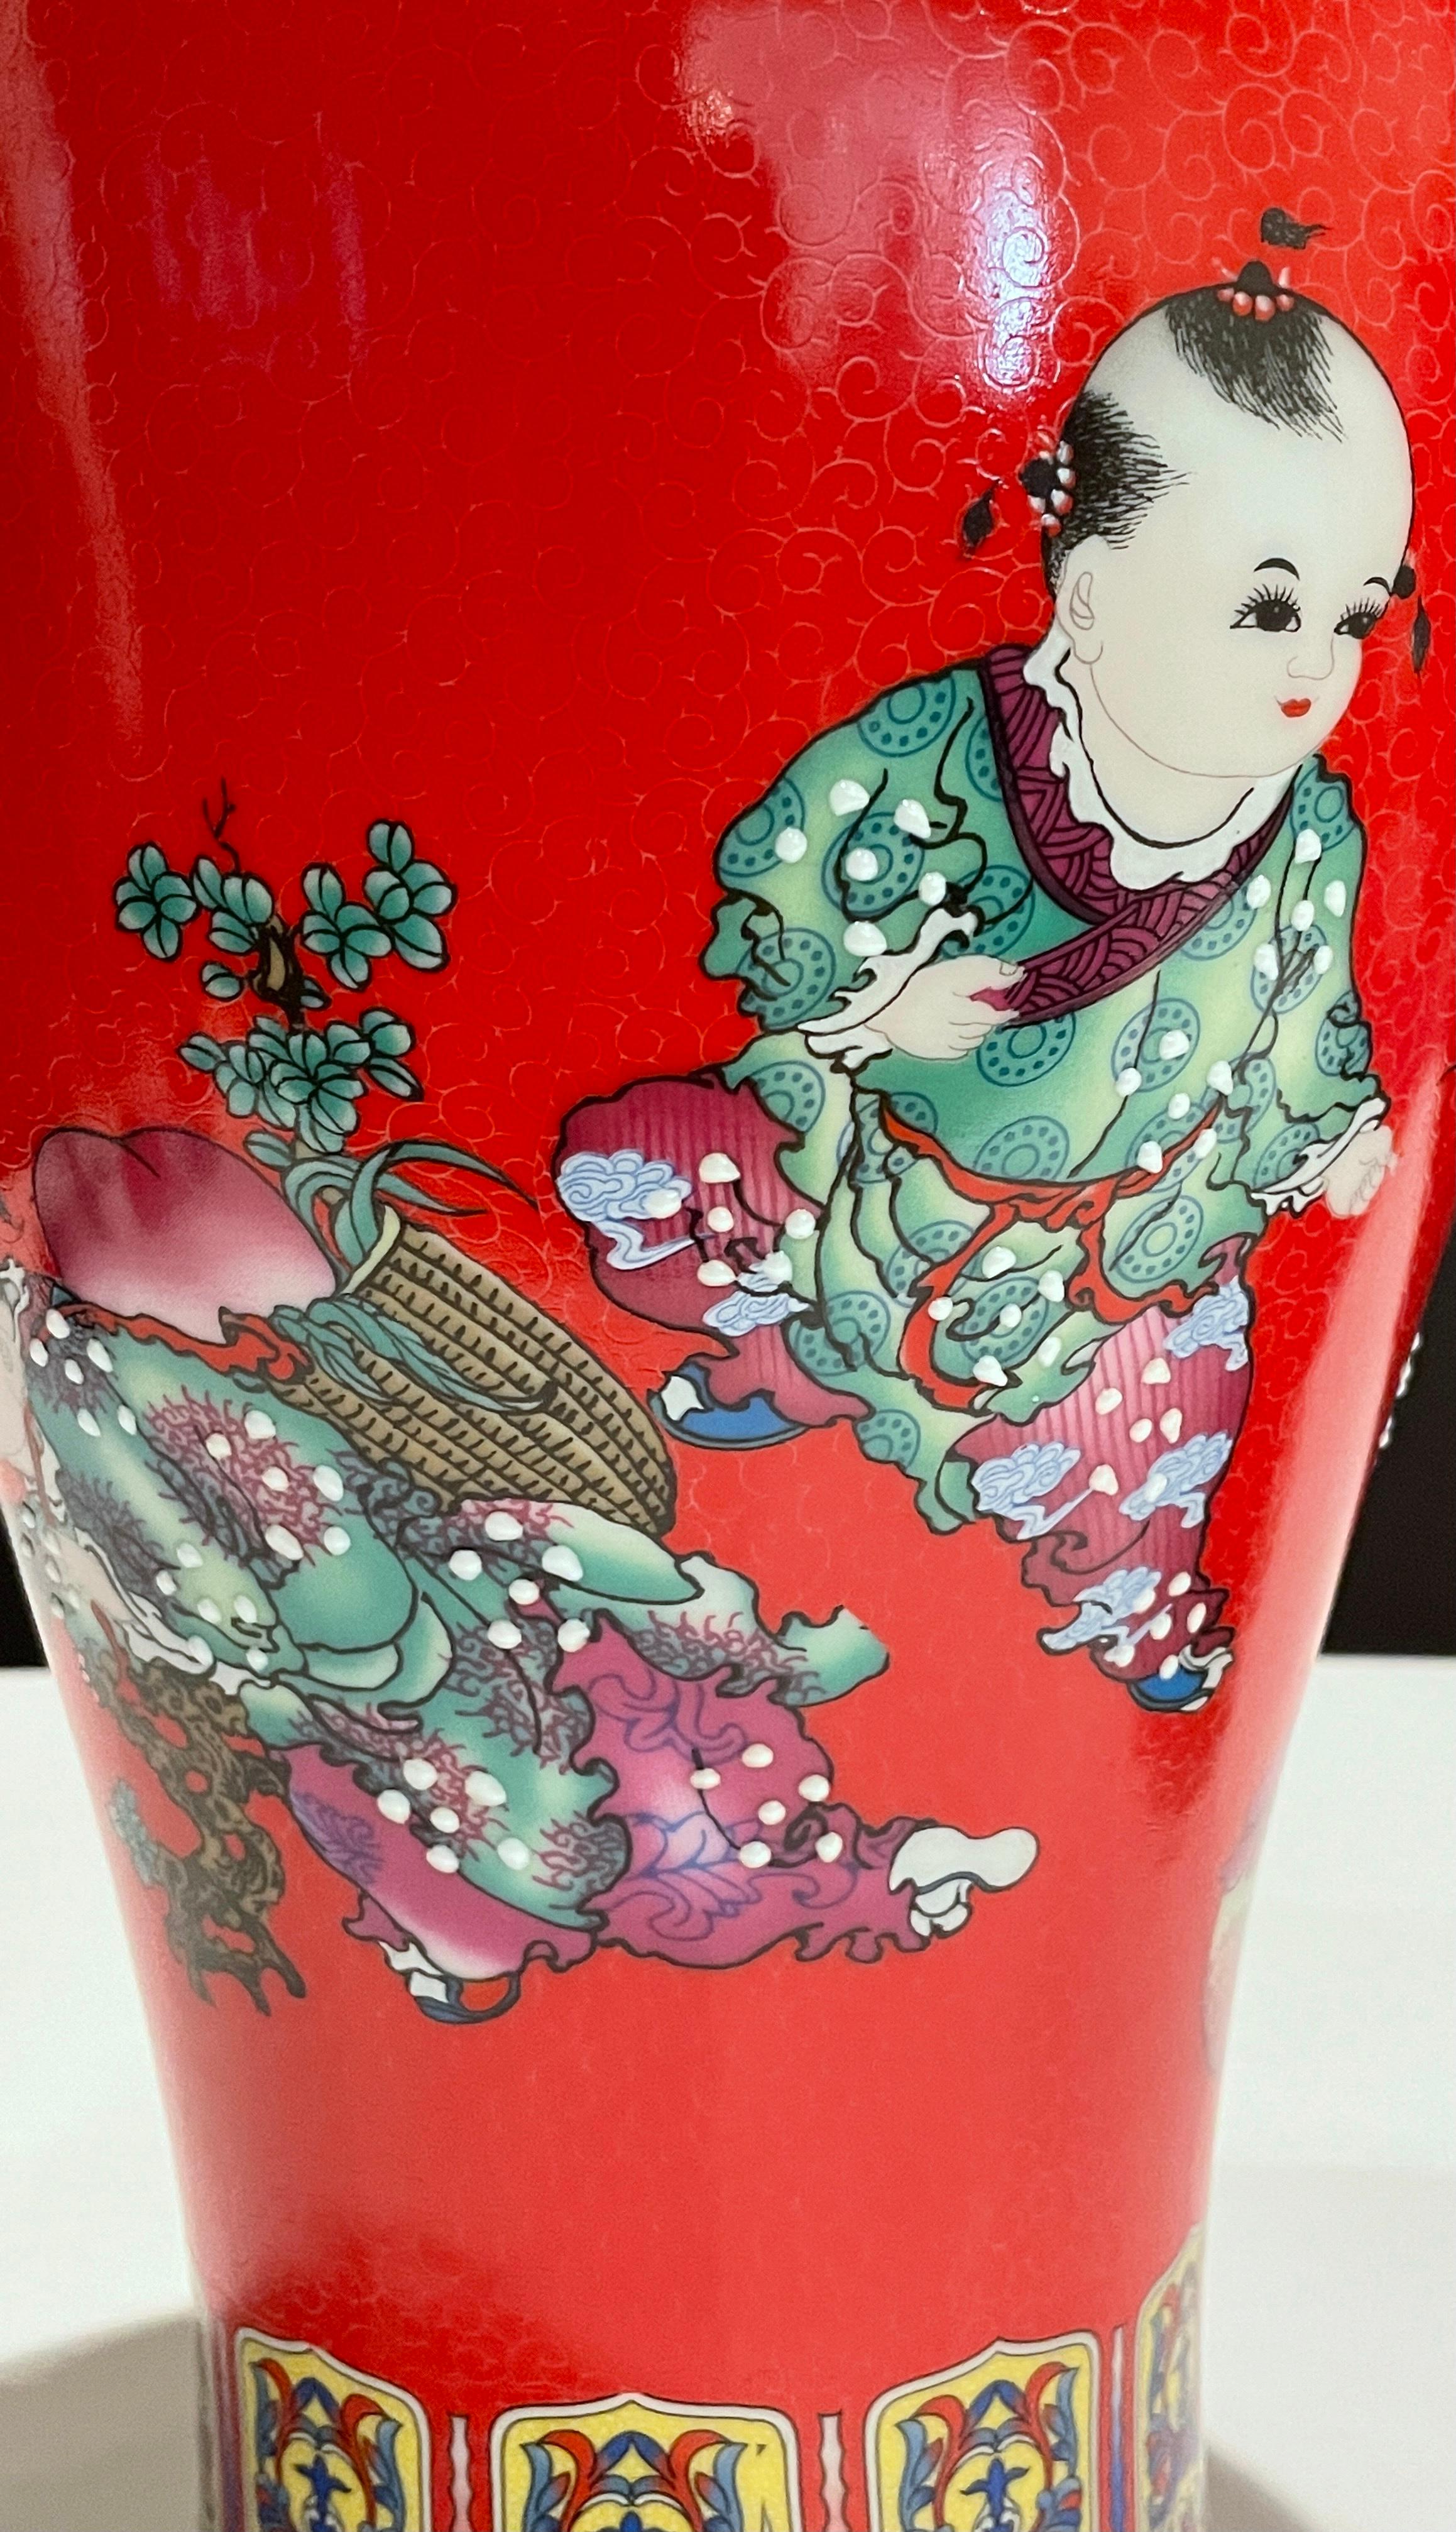 Pair of Chinese Porcelain Vases With Children In Good Condition For Sale In Norwood, NJ